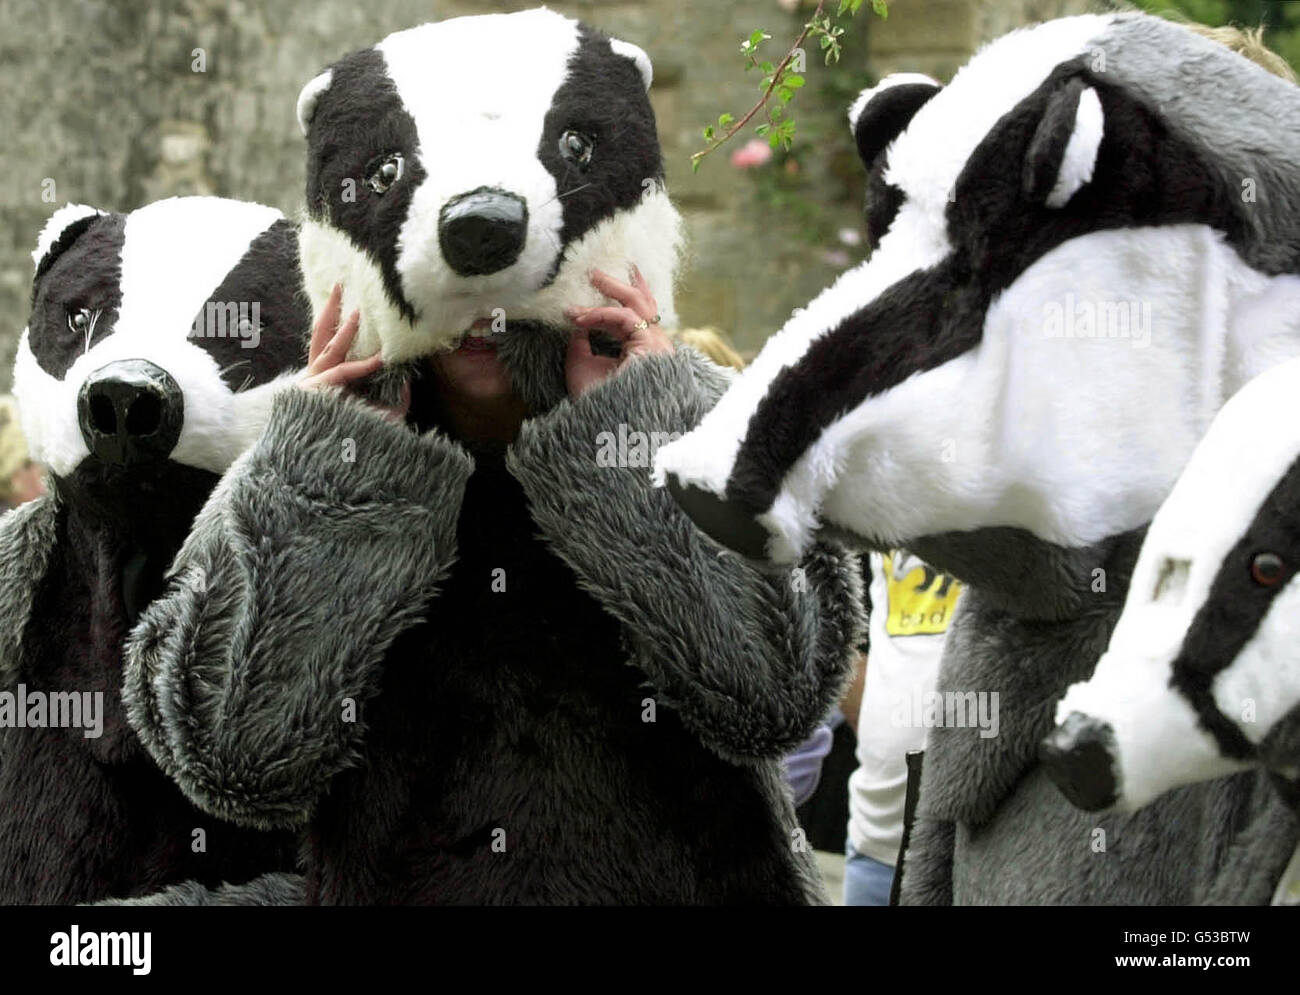 Campaigners from across the UK dressed in Badger outfits at the Peak District National Park, in Derbyshire, to protest against a cull of badgers in the area. The Government has sanctioned trappers to kill badgers in the Peak District. * ..to check whether there is a link between the animals and tuberculosis in cattle. Stock Photo